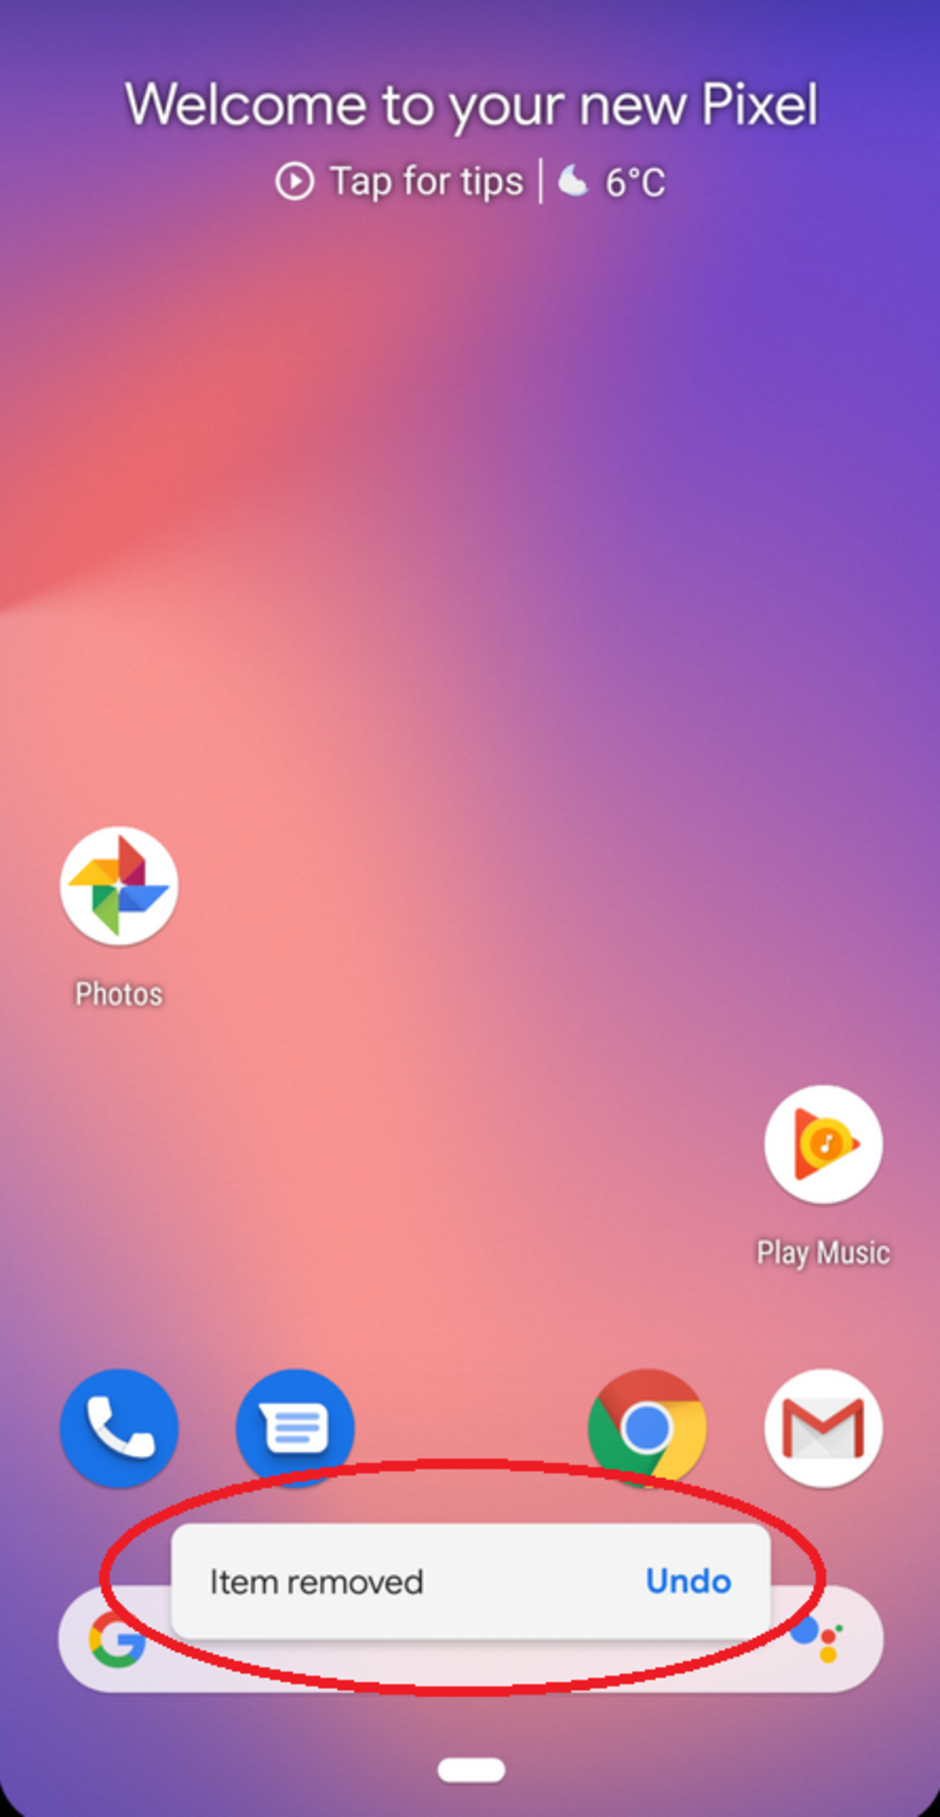 Android Q will allow Pixel users to replace icons accidentally removed from the home screen - Google includes two minor, but useful features with Android Q beta